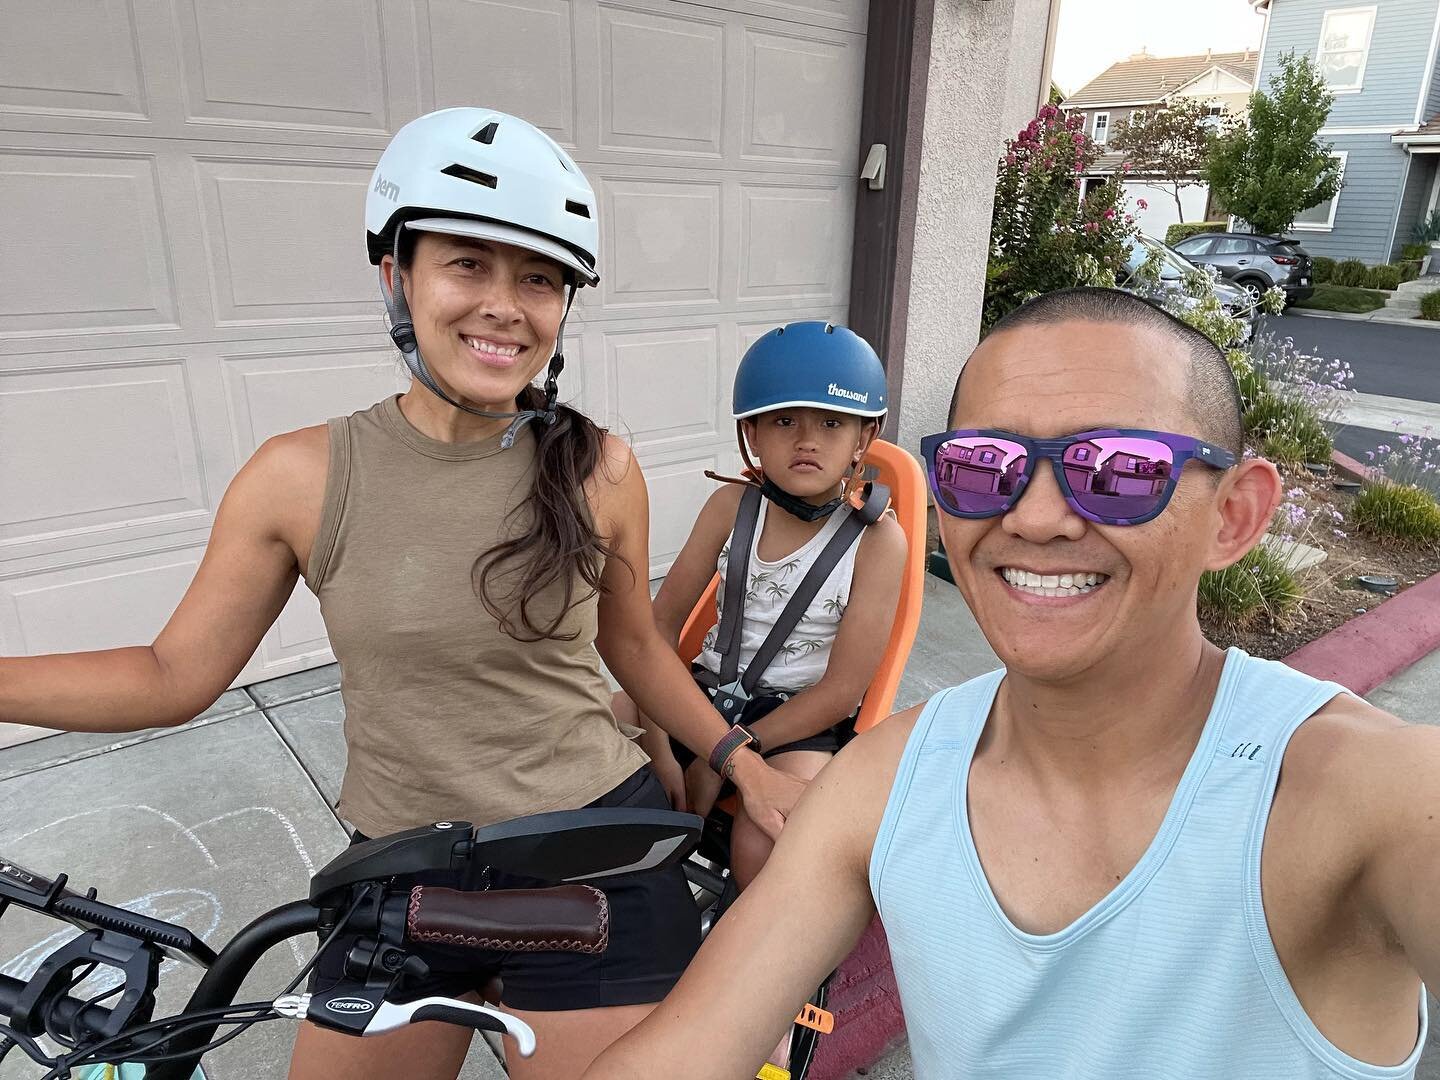 Sometimes we do other things besides run 😉. Last night, family bike ride minus the other 3 boys as they had pre scheduled stuff. Triple digits didn&rsquo;t stop us. Sunscreen + music = will enjoy outdoors!